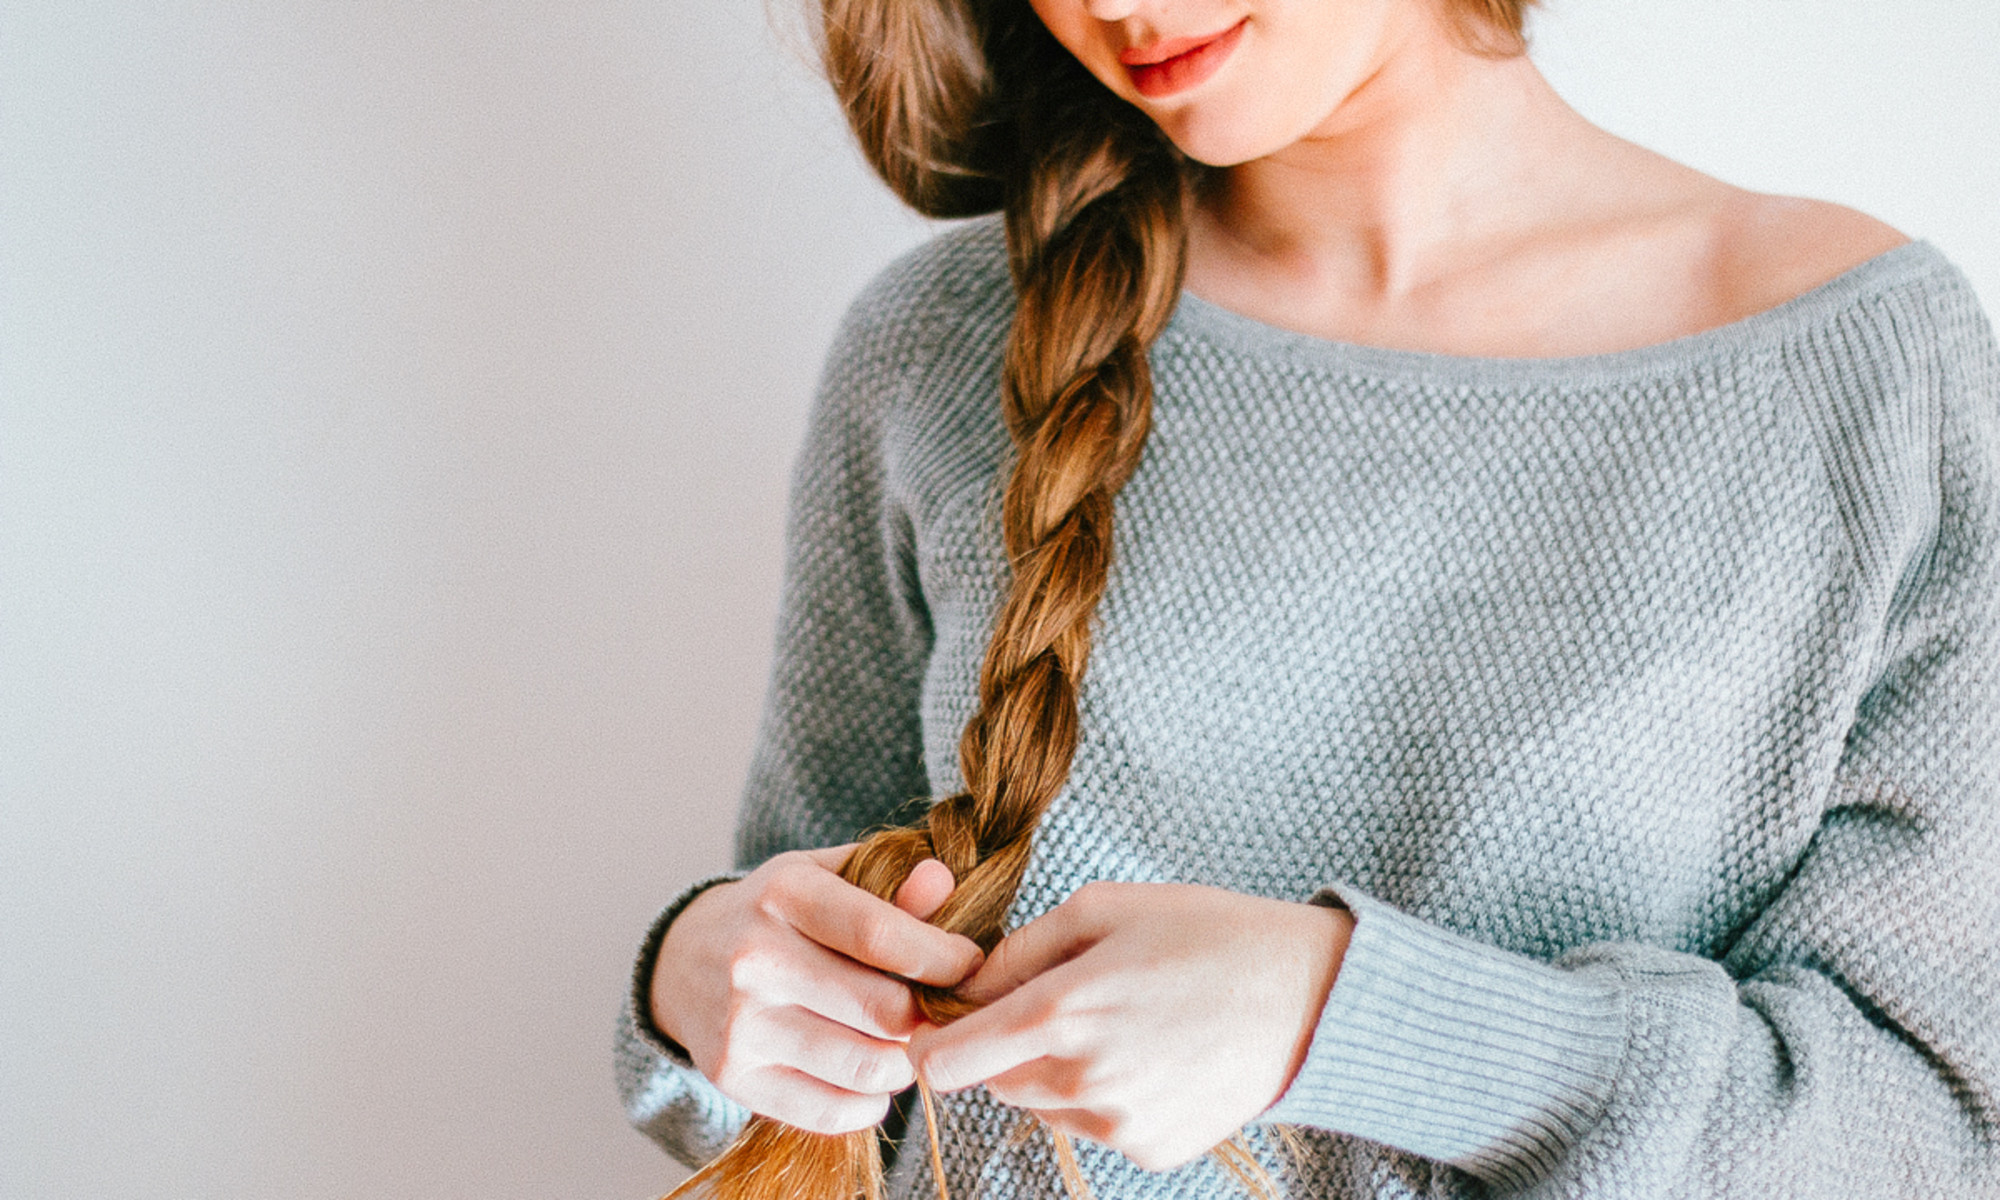 How To Make Your Hair Grow Faster: 15 Natural Hair Growth Tips |  mindbodygreen